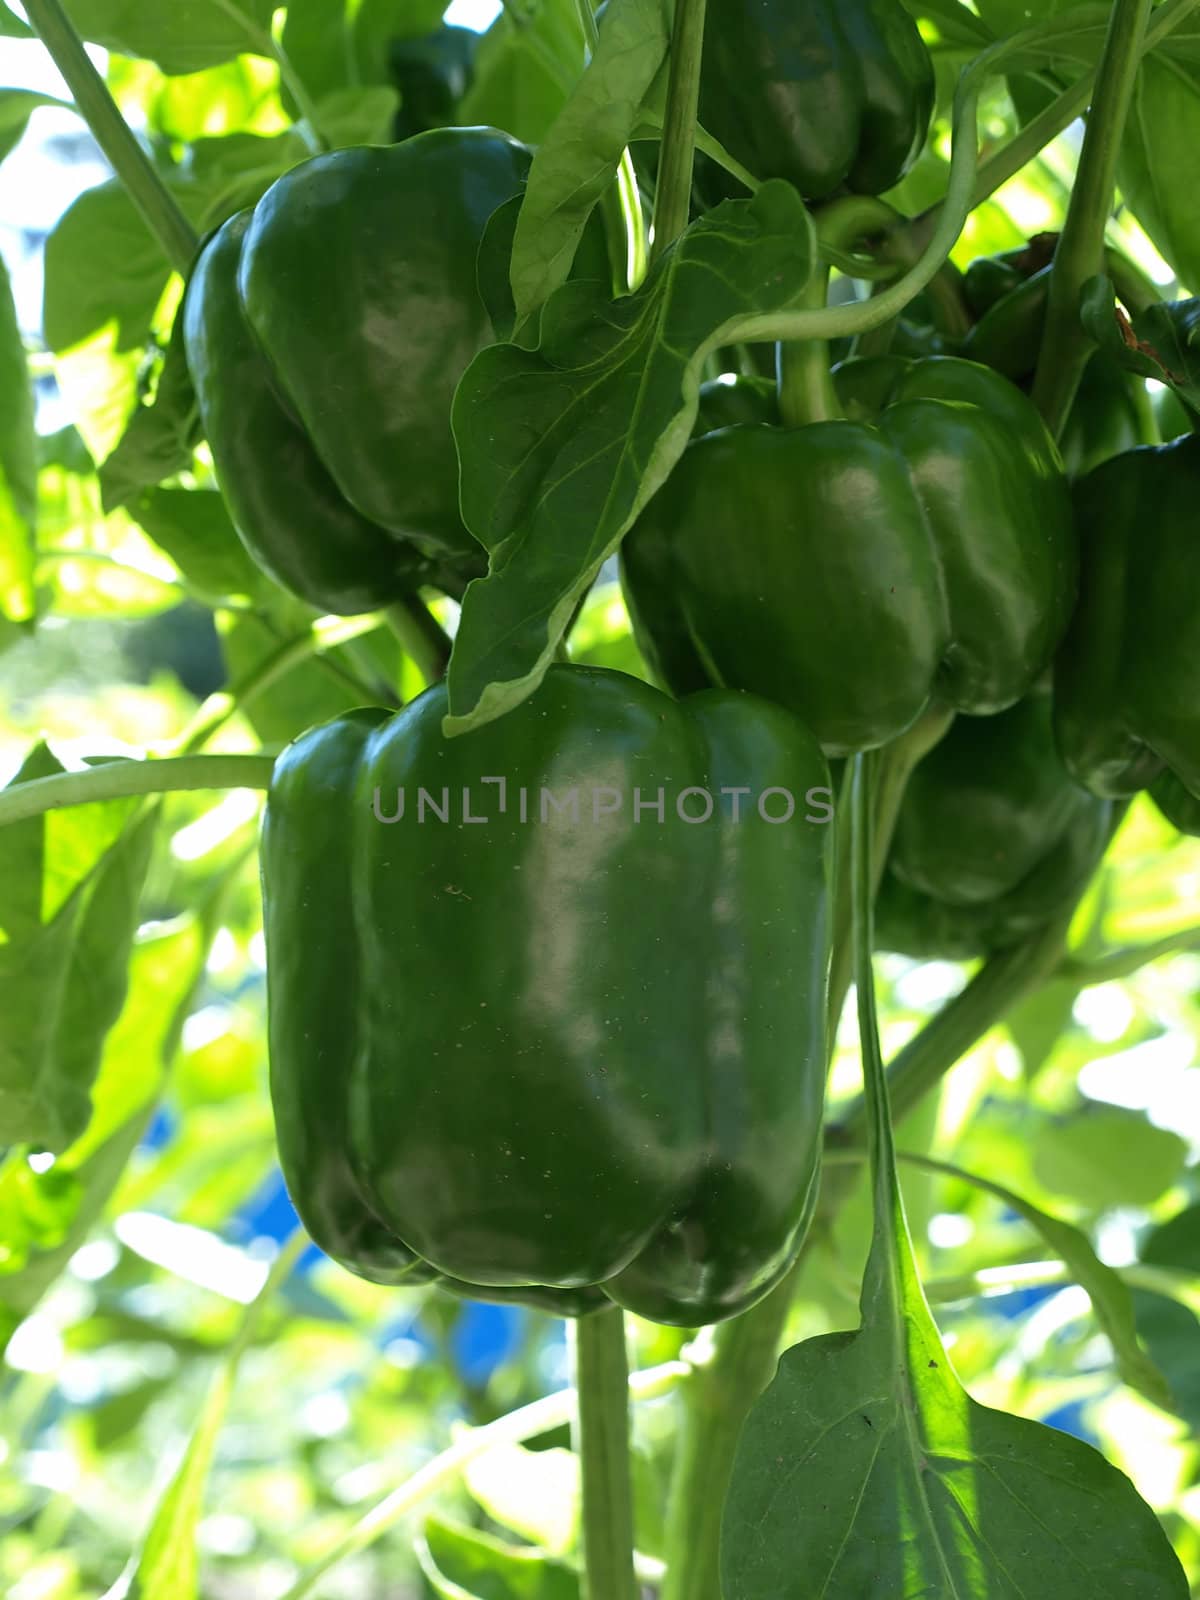 Beautiful green bell peppers growing on a vine in a garden